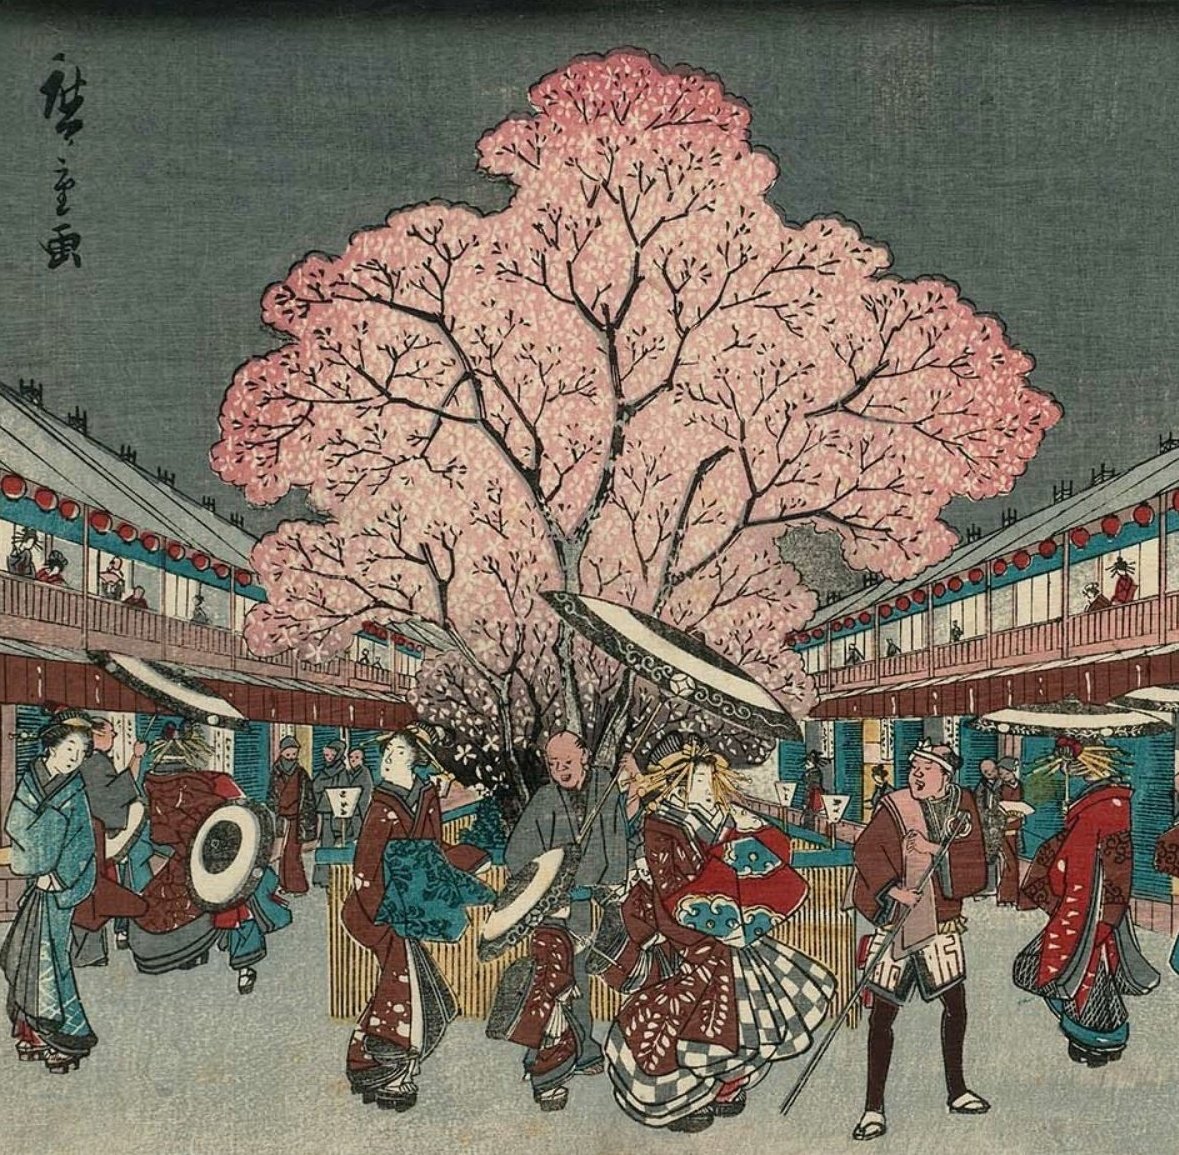 In Japan, Spring means cherry blossoms. Known as sakura, they represent springtime and symbolise fleeting beauty and the shortness of life. Festivals to celebrate the appearance of these beautiful flowers occur in spring and are known as hanami. 🌸 #FolkyFriday 1/20